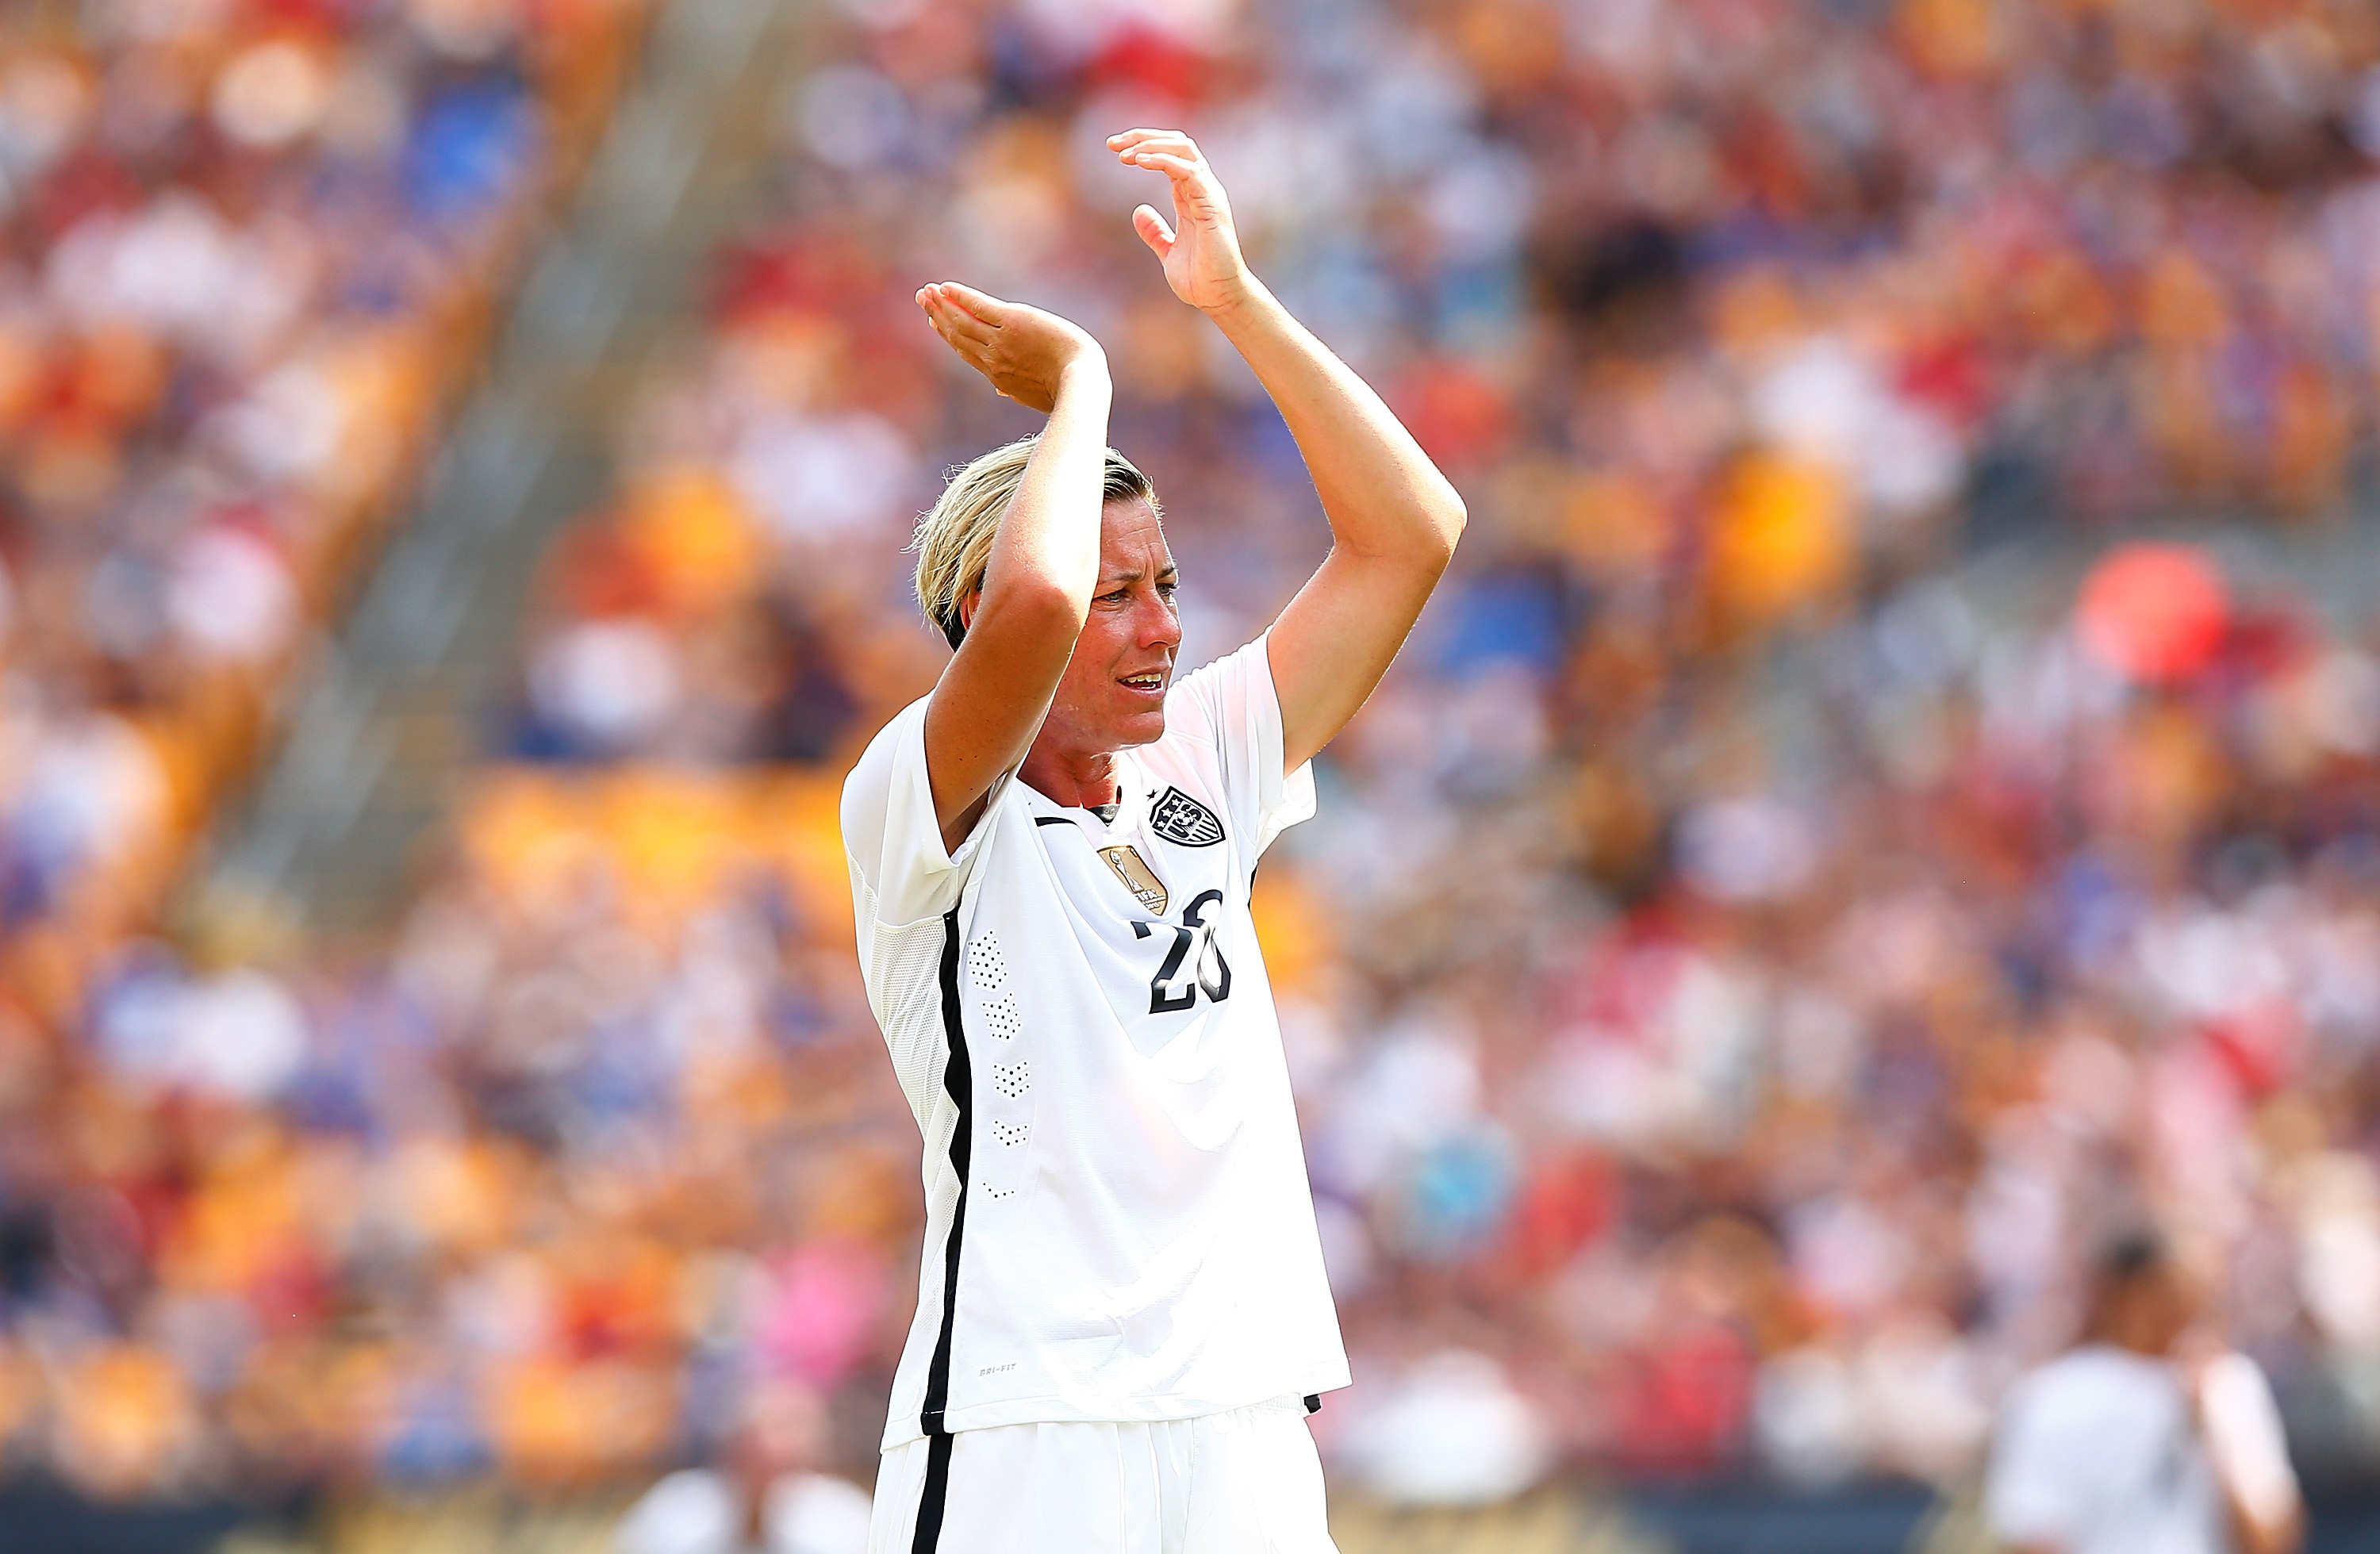 Abby Wambach retiring from international soccer at end of 2015.